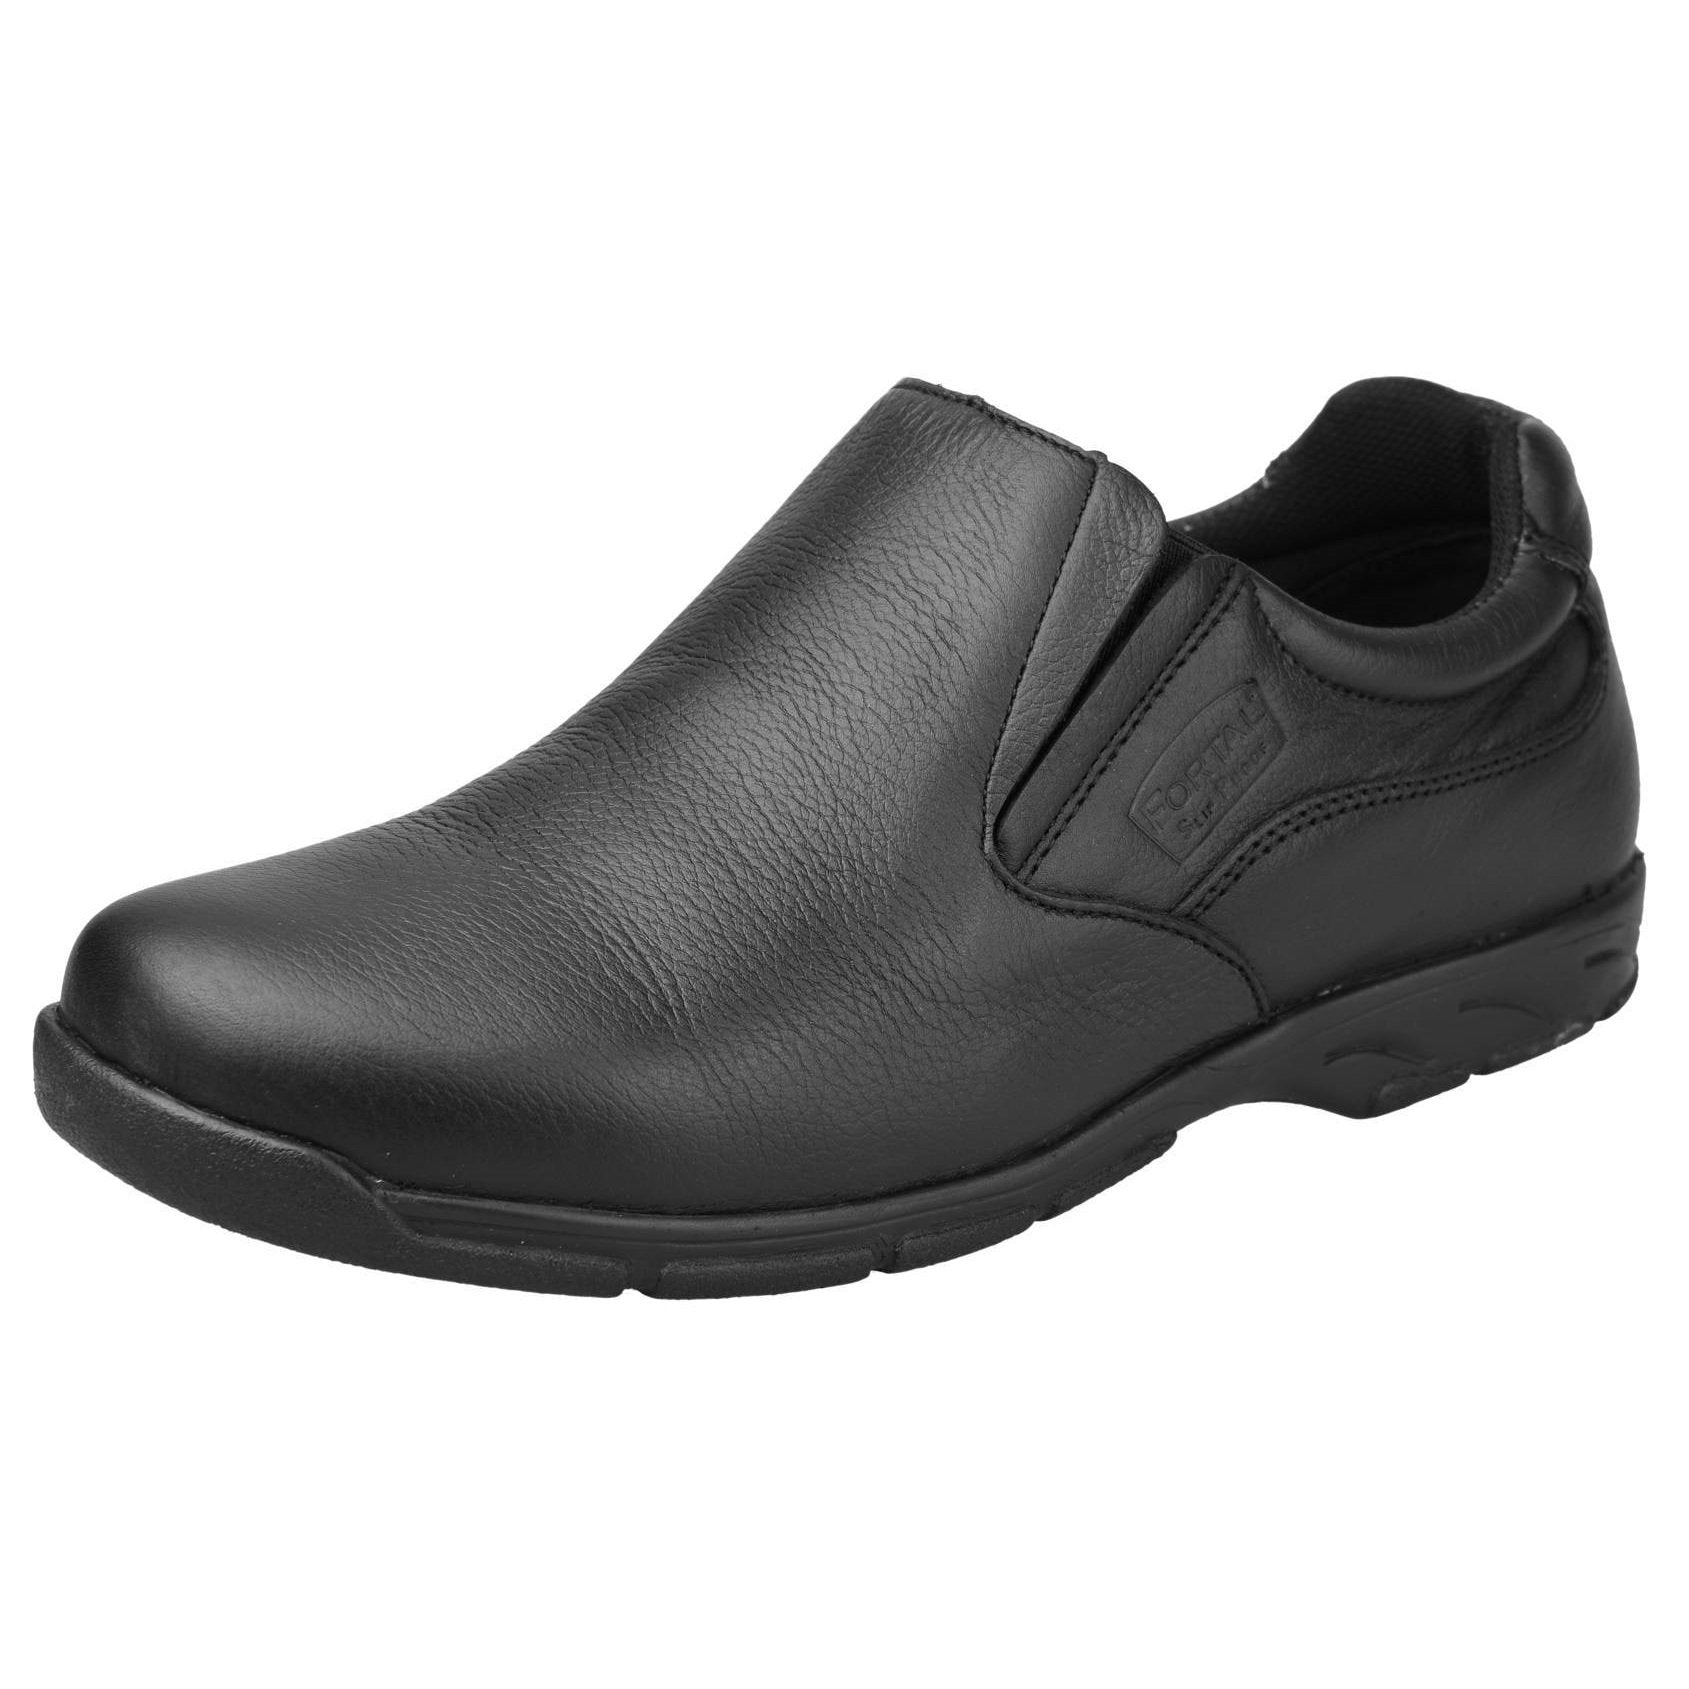 Women's Slip Resistant Shoes - Work Safety Shoes